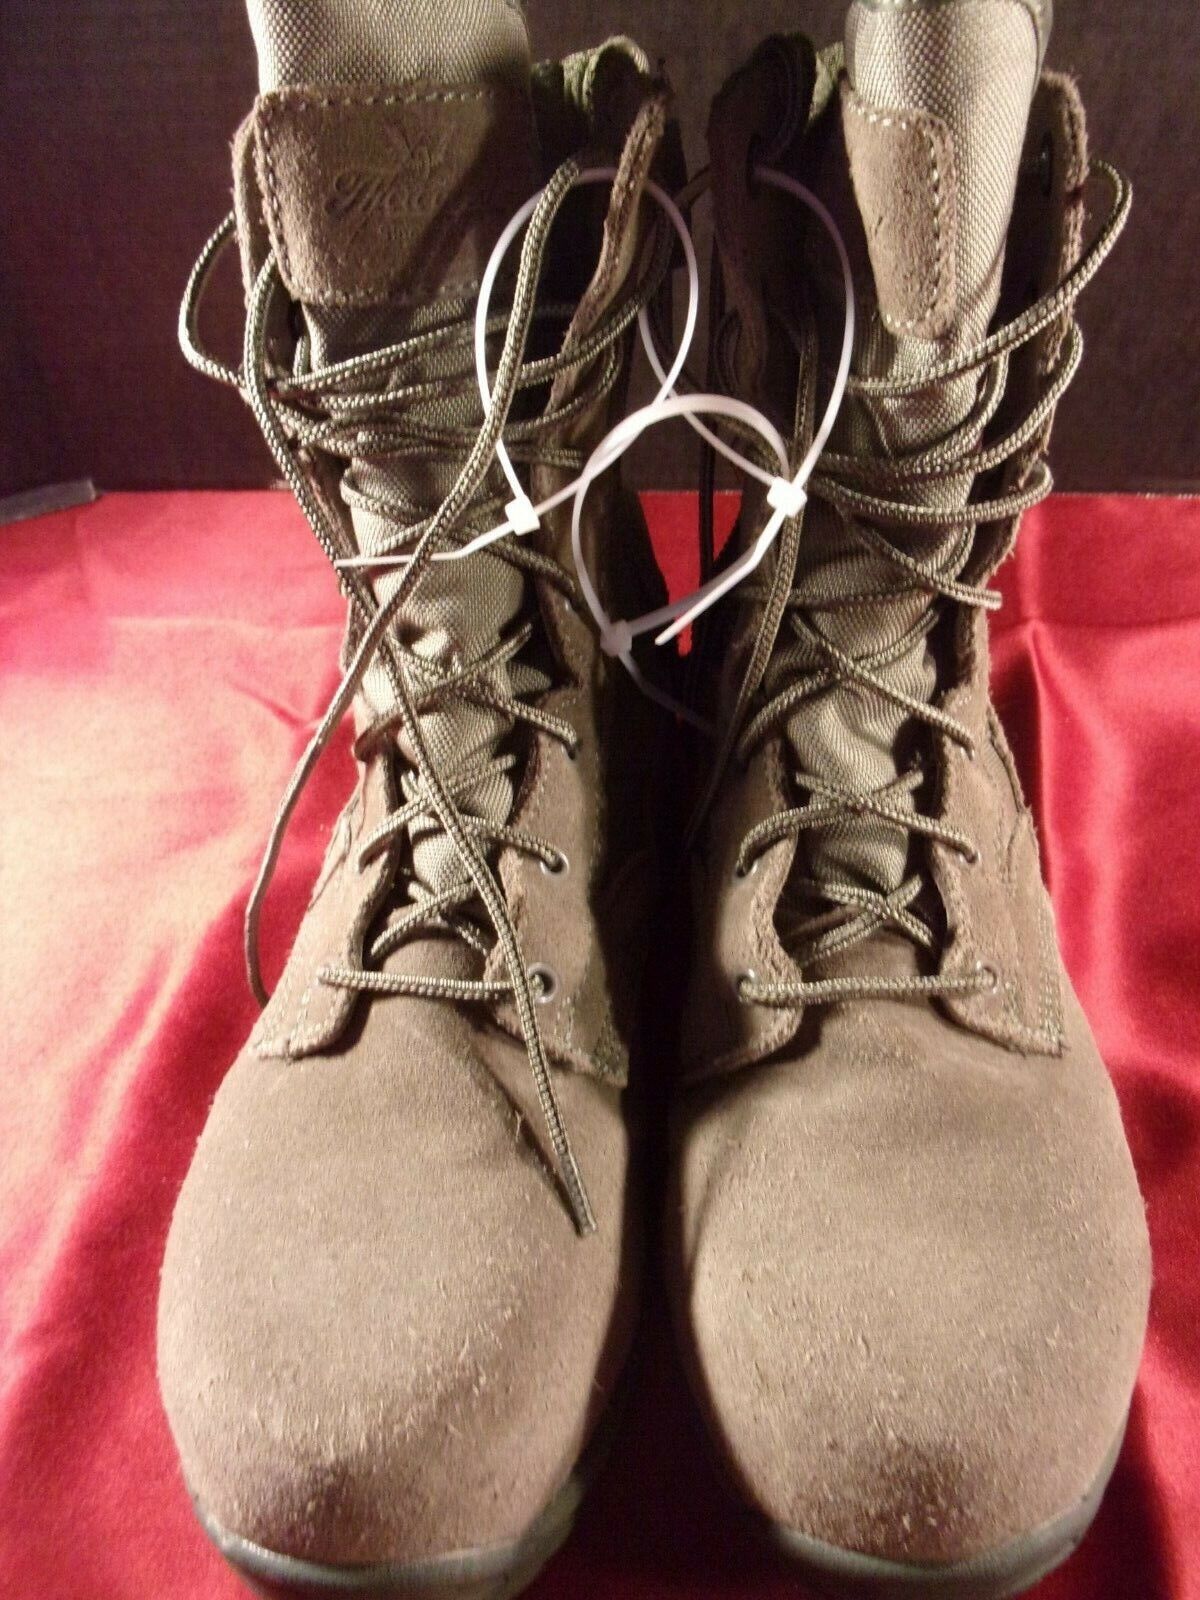 THOROGOOD Sage Military Boots F2413-11 UNISEX BOOTS MEN Size 6M OR WOMEN SIZE 8M